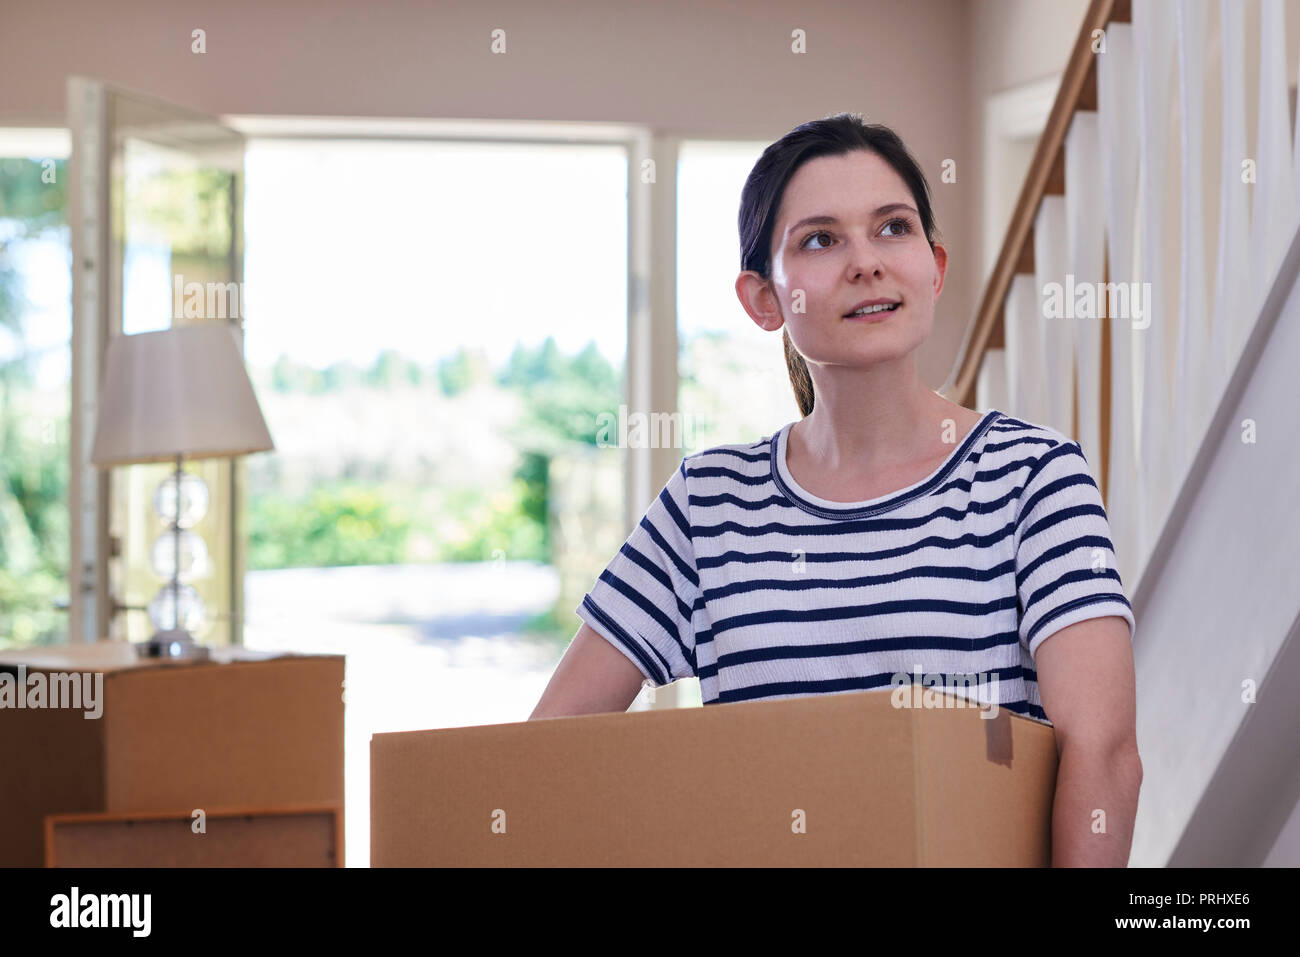 Young Woman Carrying Boxes Into New Home On Moving Day Stock Photo